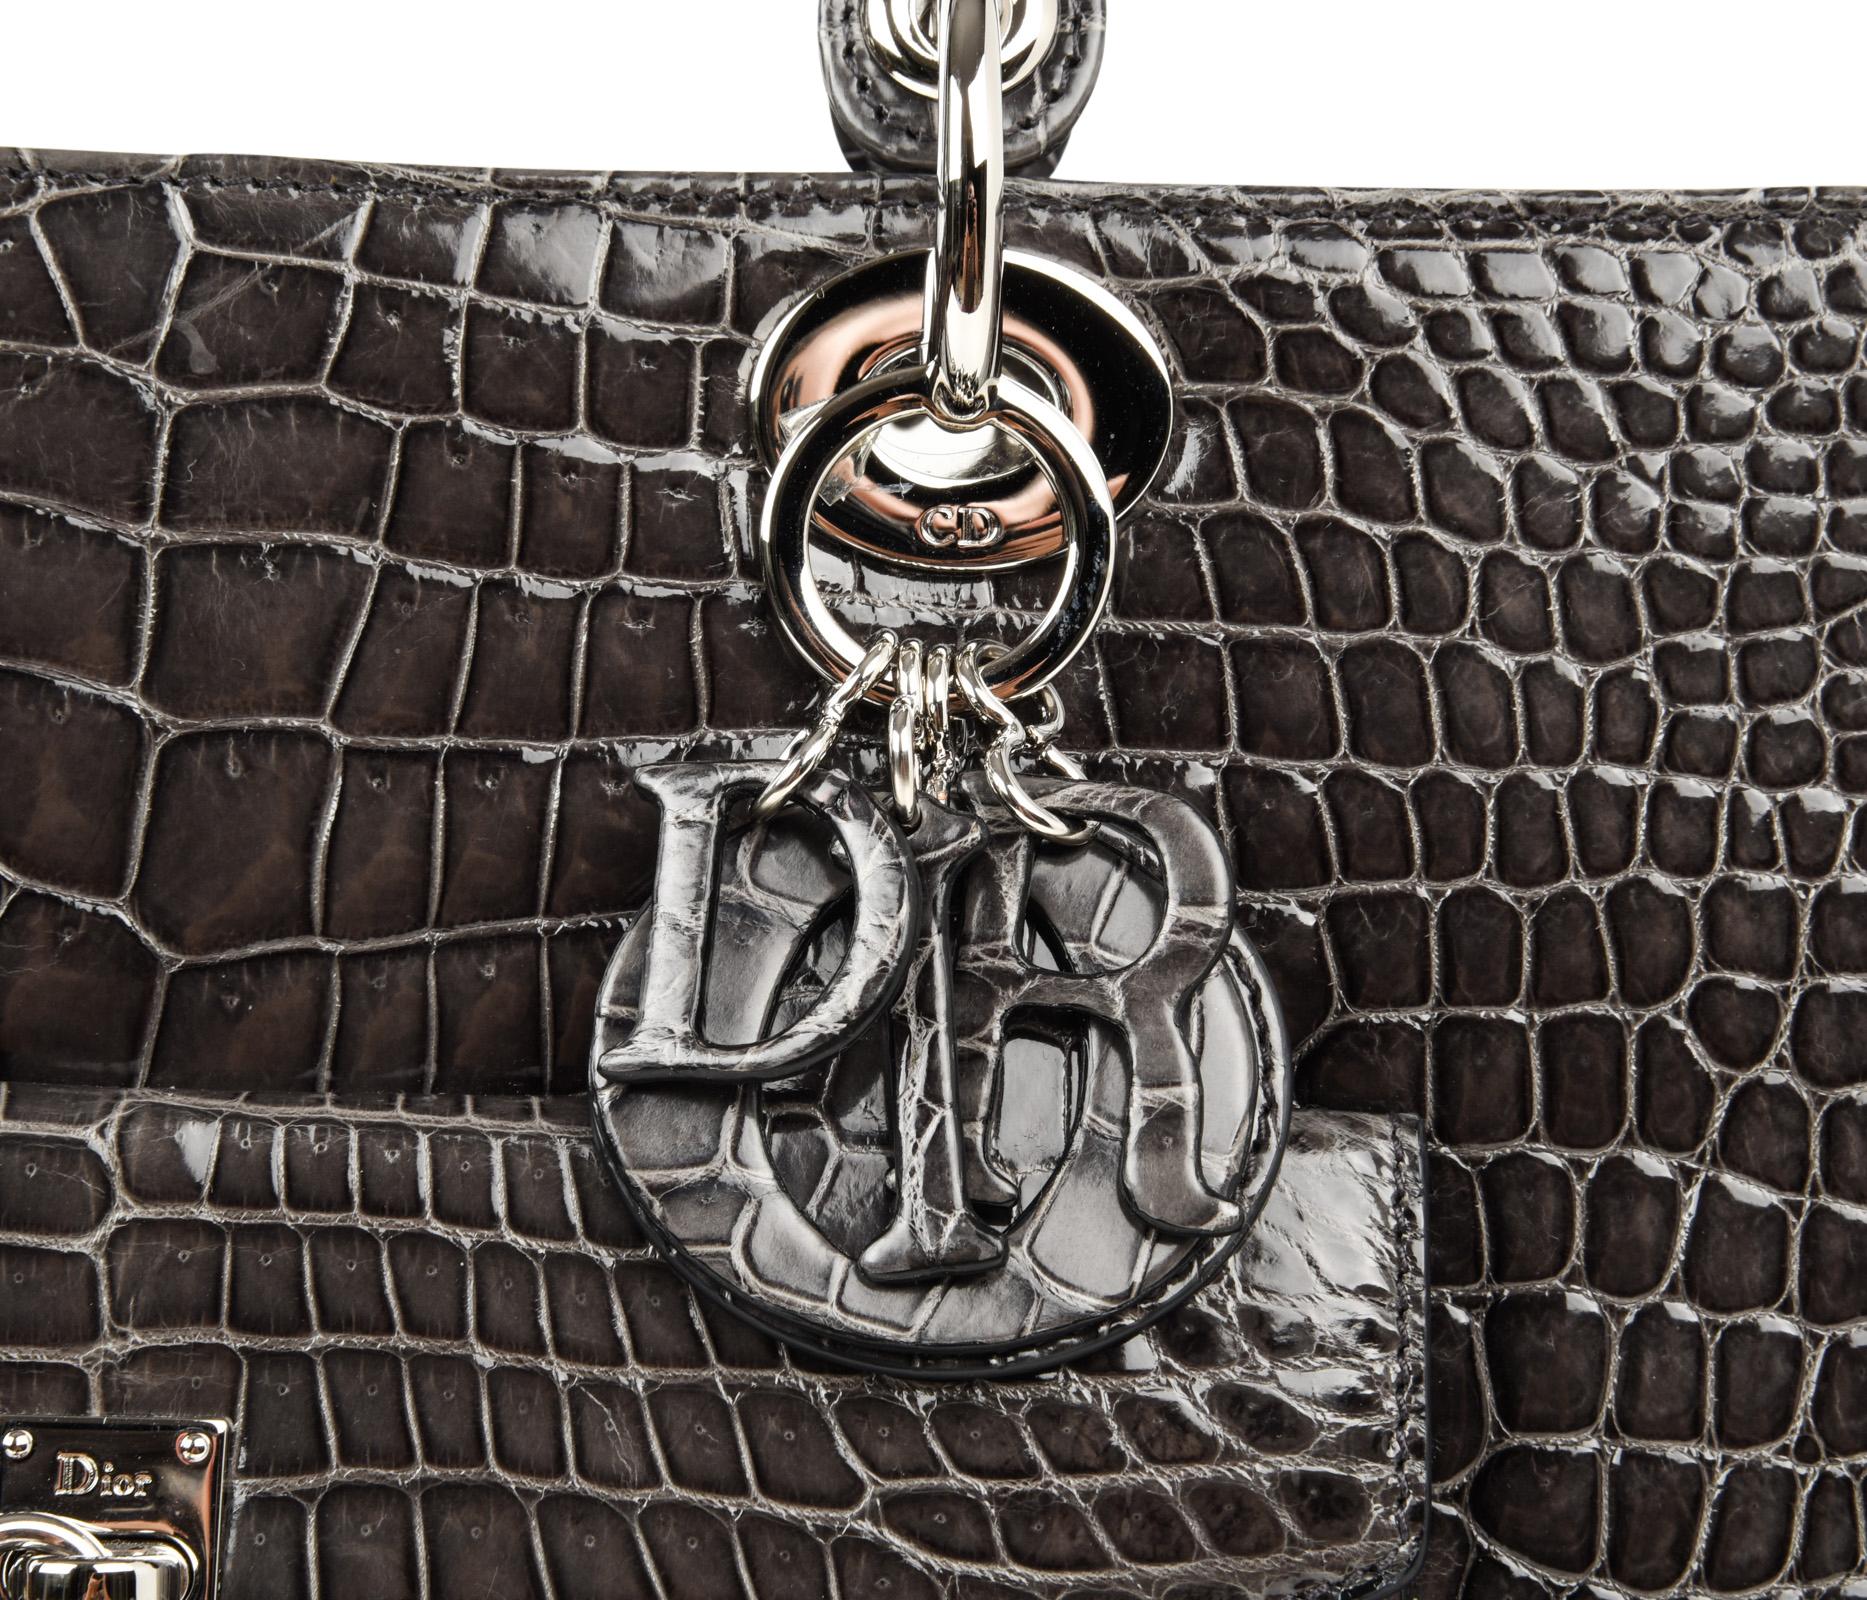 Guaranteed authentic Christian Dior Lady Dior Front Pocket Gray crocodile limited edition bag with silver toned hardware.
Crafted by hand this is the flagship model.
Signature logo charms.
Top zipper closure with signature toggle.  
Zipper pocket on